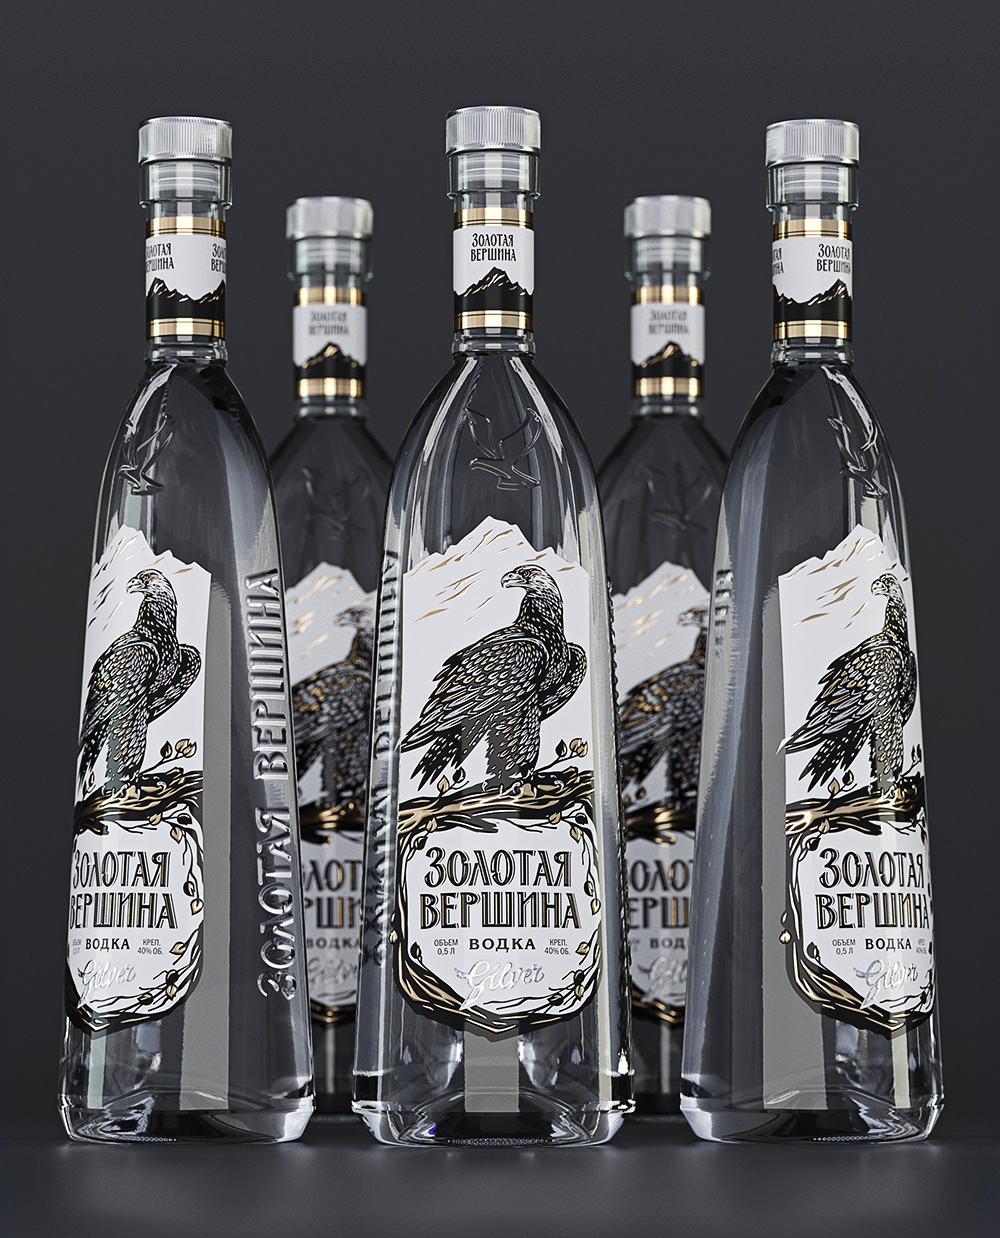  Russian Vodka for Those Who Feel Strong Nostalgia for Sharp Rocks and Cold Winds